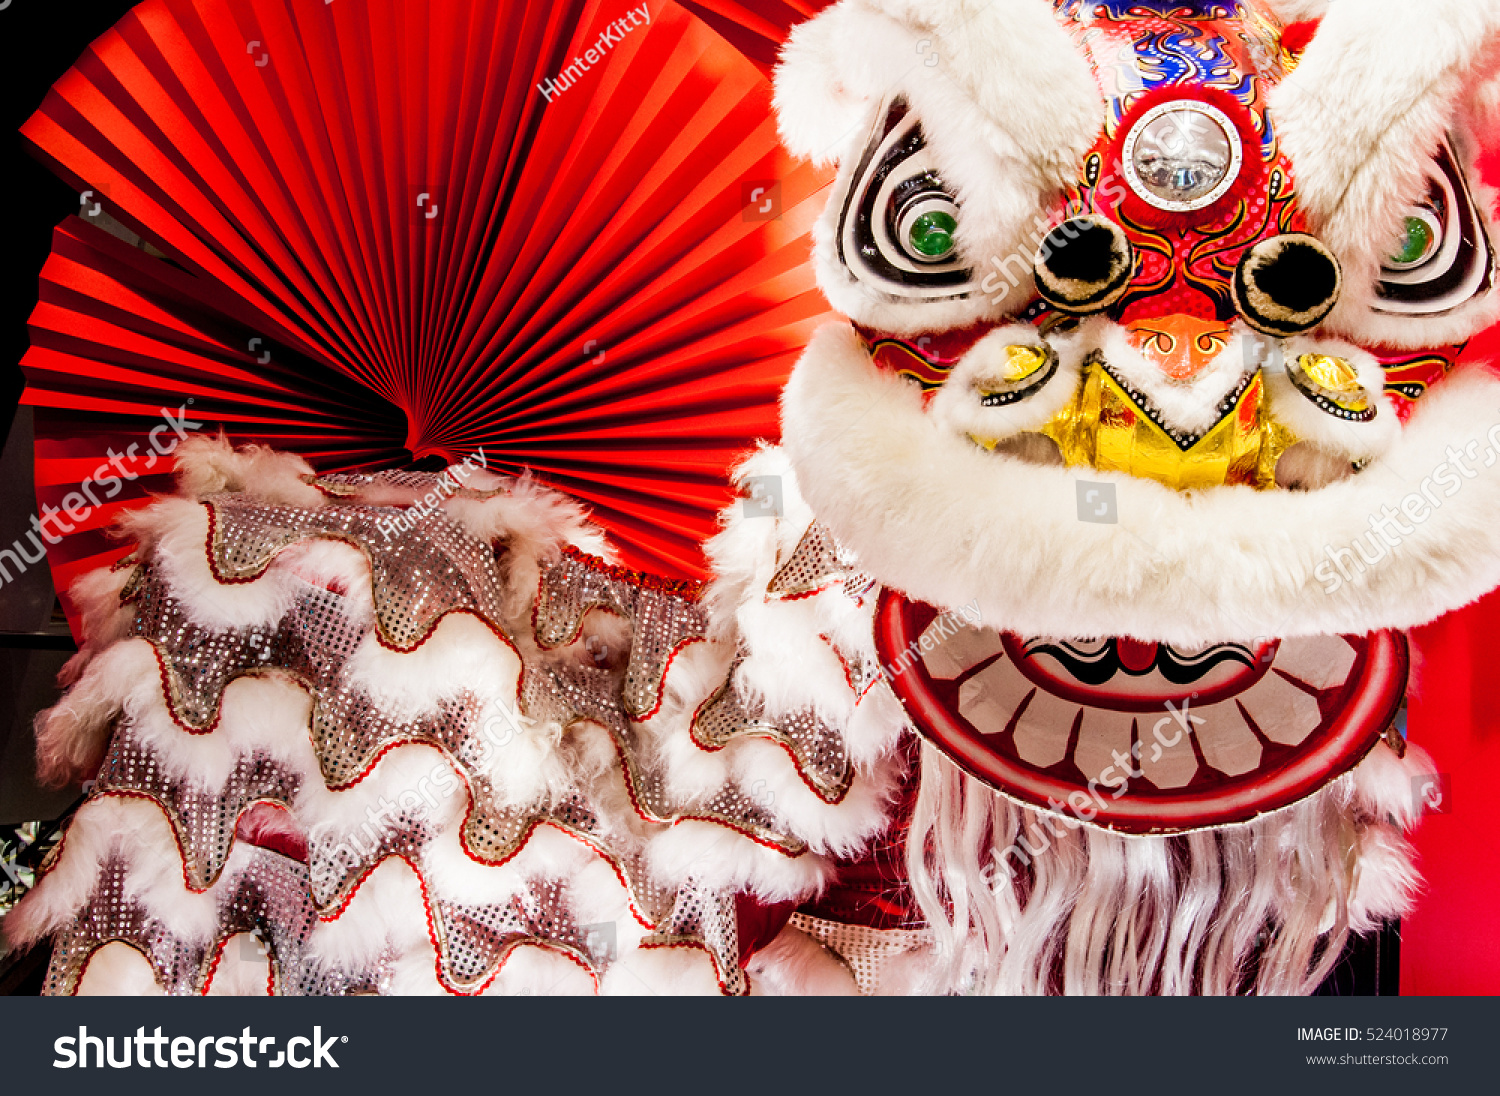 Chinese lion dance for Chinese new year with red fan in the background #524018977